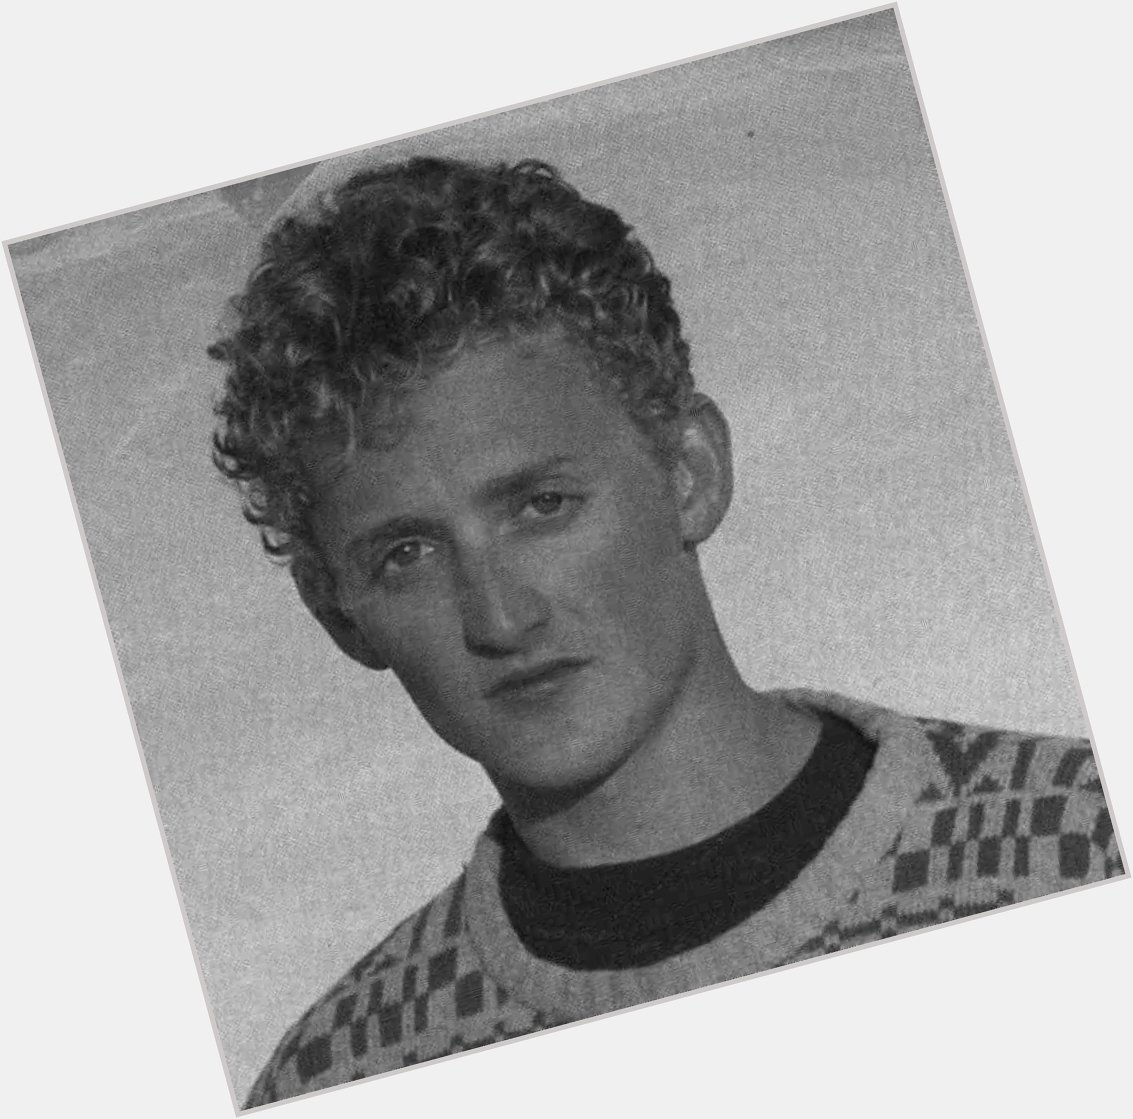 Happy 56th birthday Alex winter from  down in Illinois 